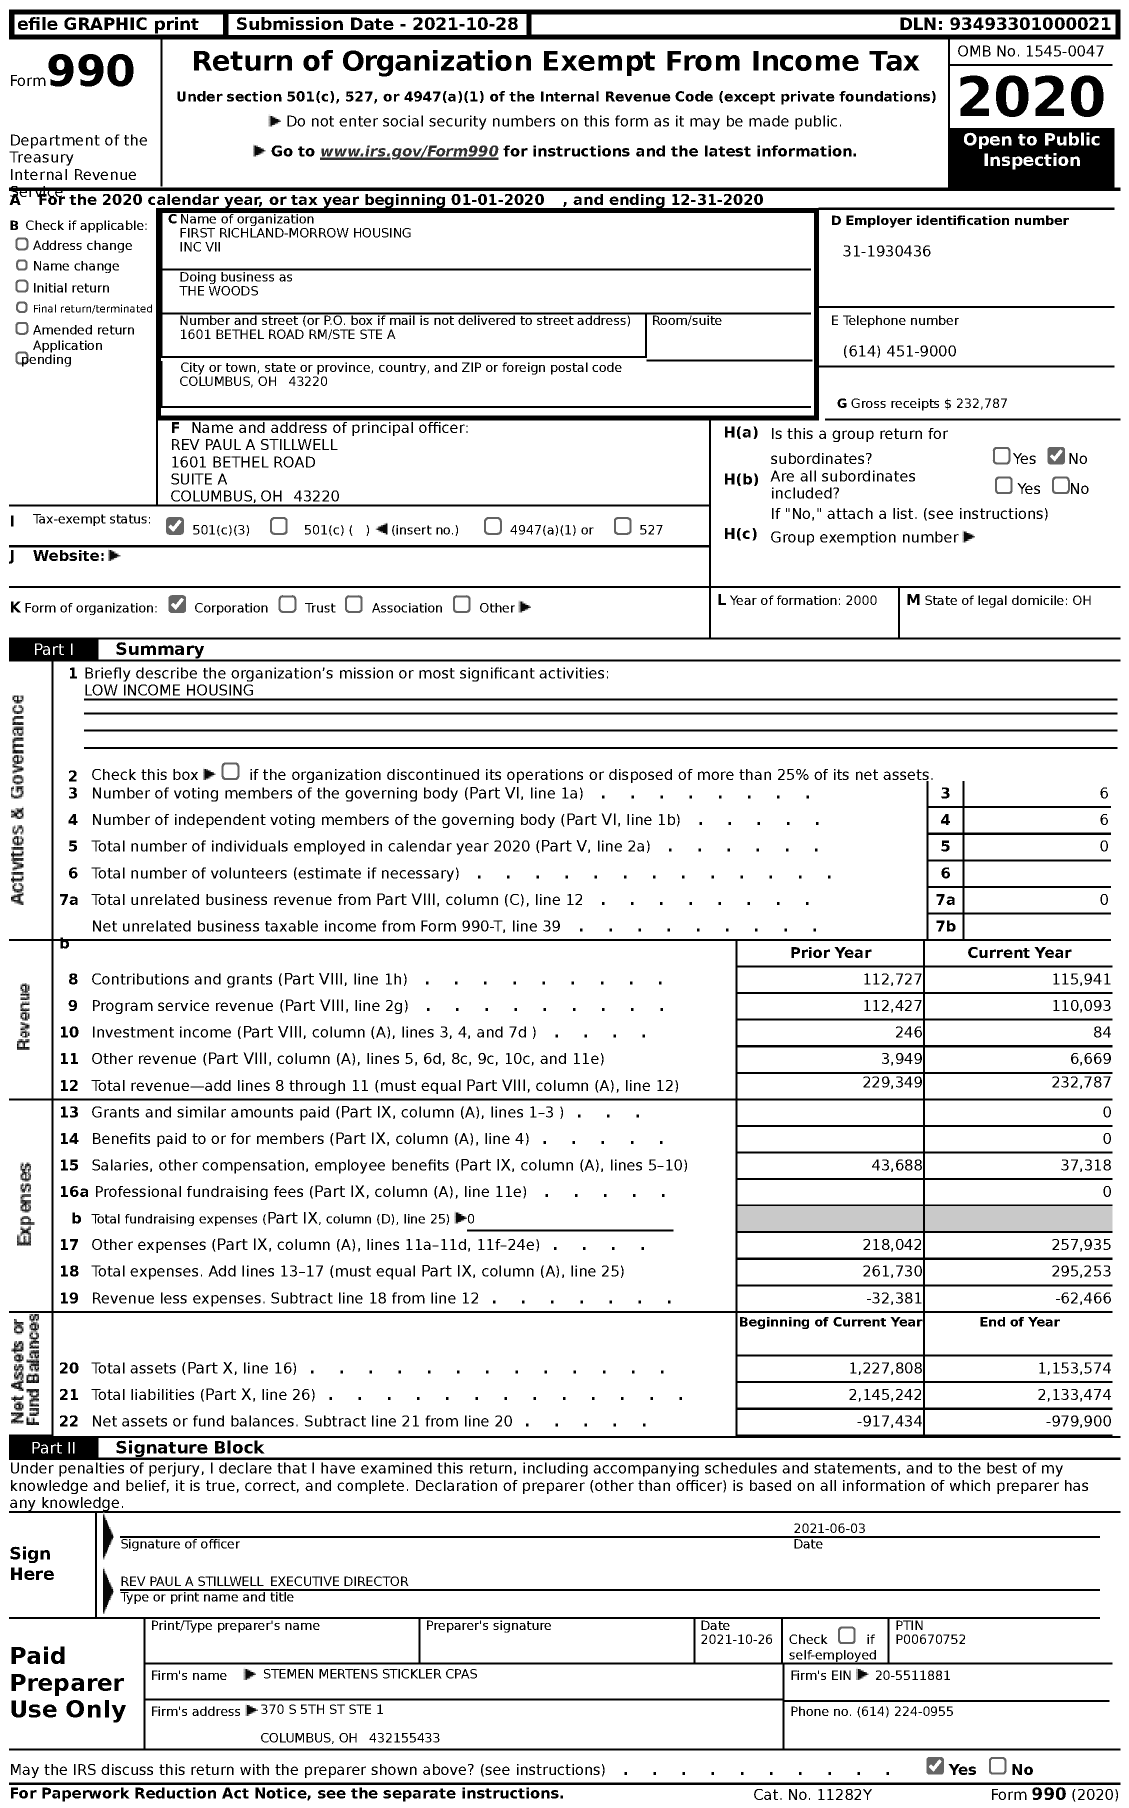 Image of first page of 2020 Form 990 for The Woods / First Richland-Morrow Housing Inc Vii